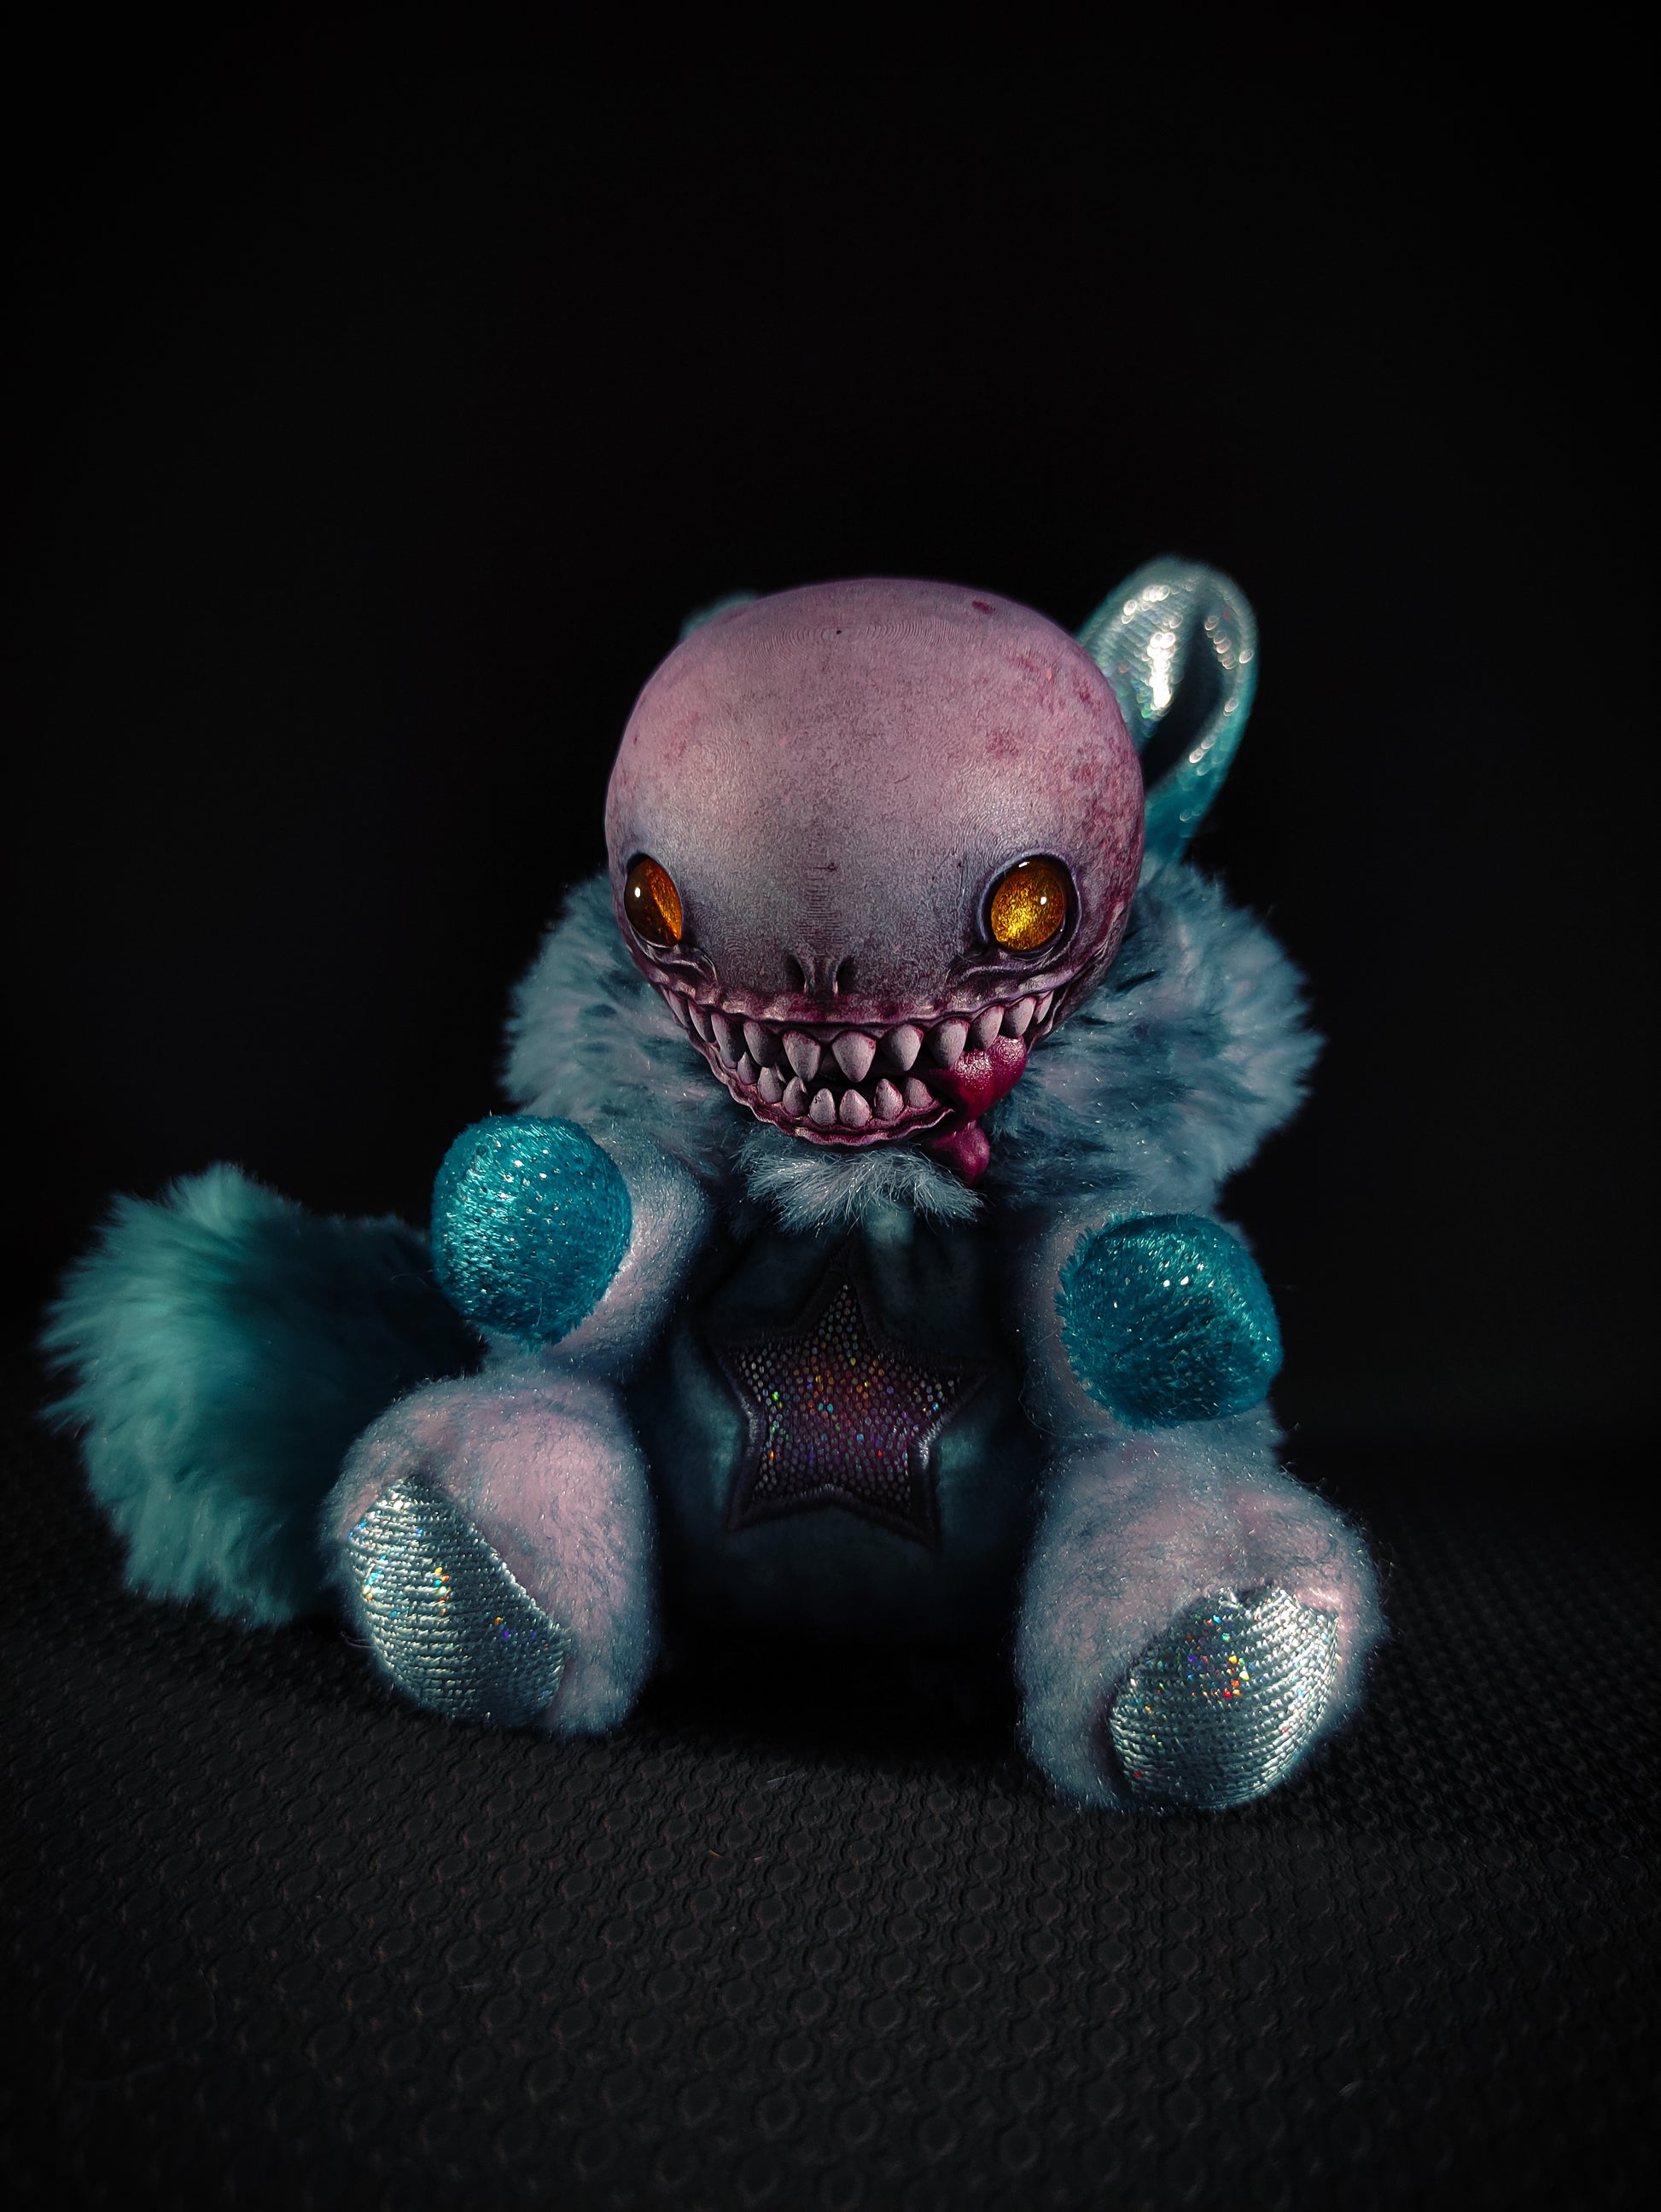 Bloold - FRIEND Cryptid Art Doll Plush Toy